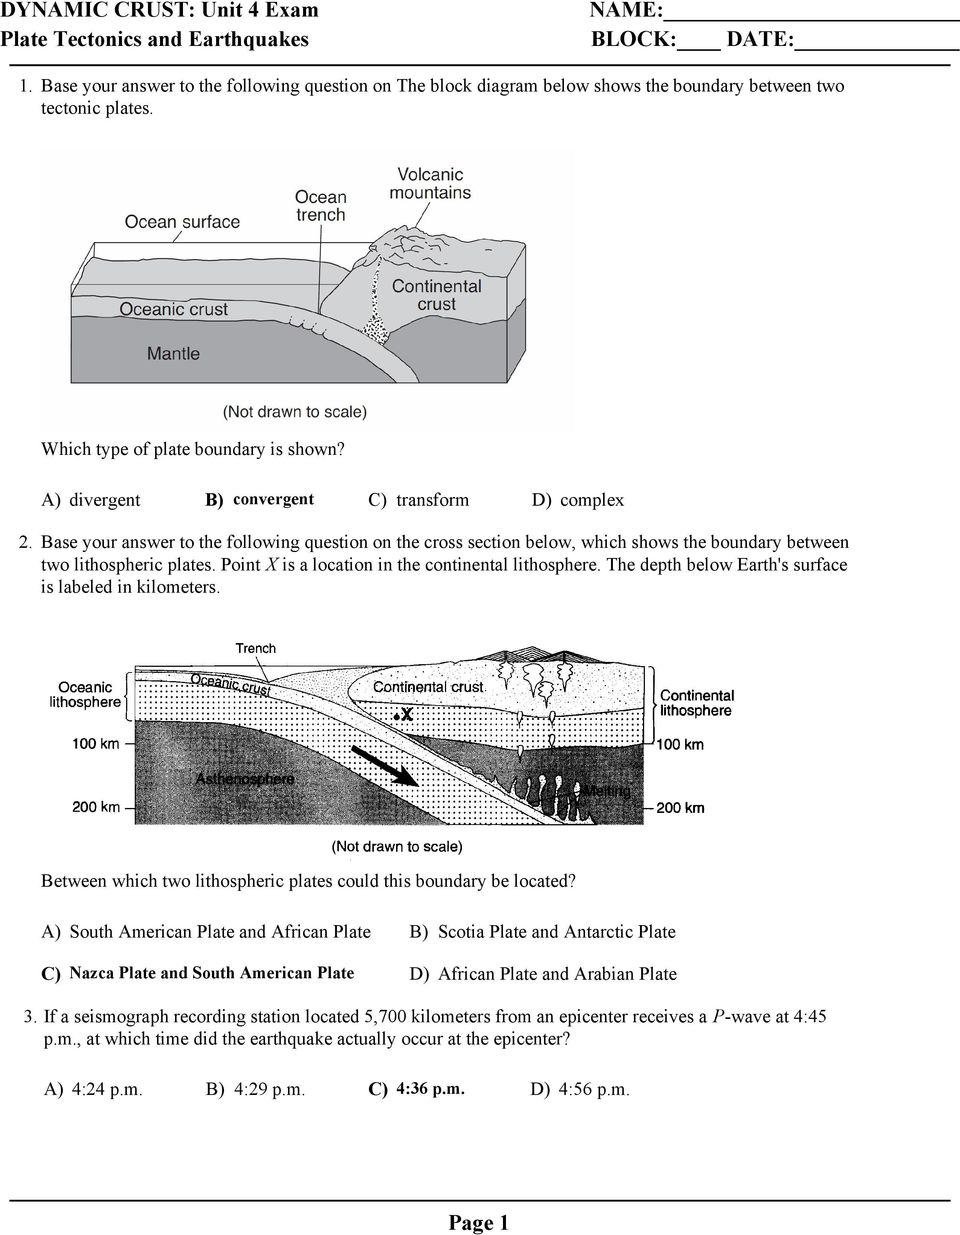 Base your answer to the following question on the cross section below, which shows the boundary between two lithospheric plates. Point X is a location in the continental lithosphere.